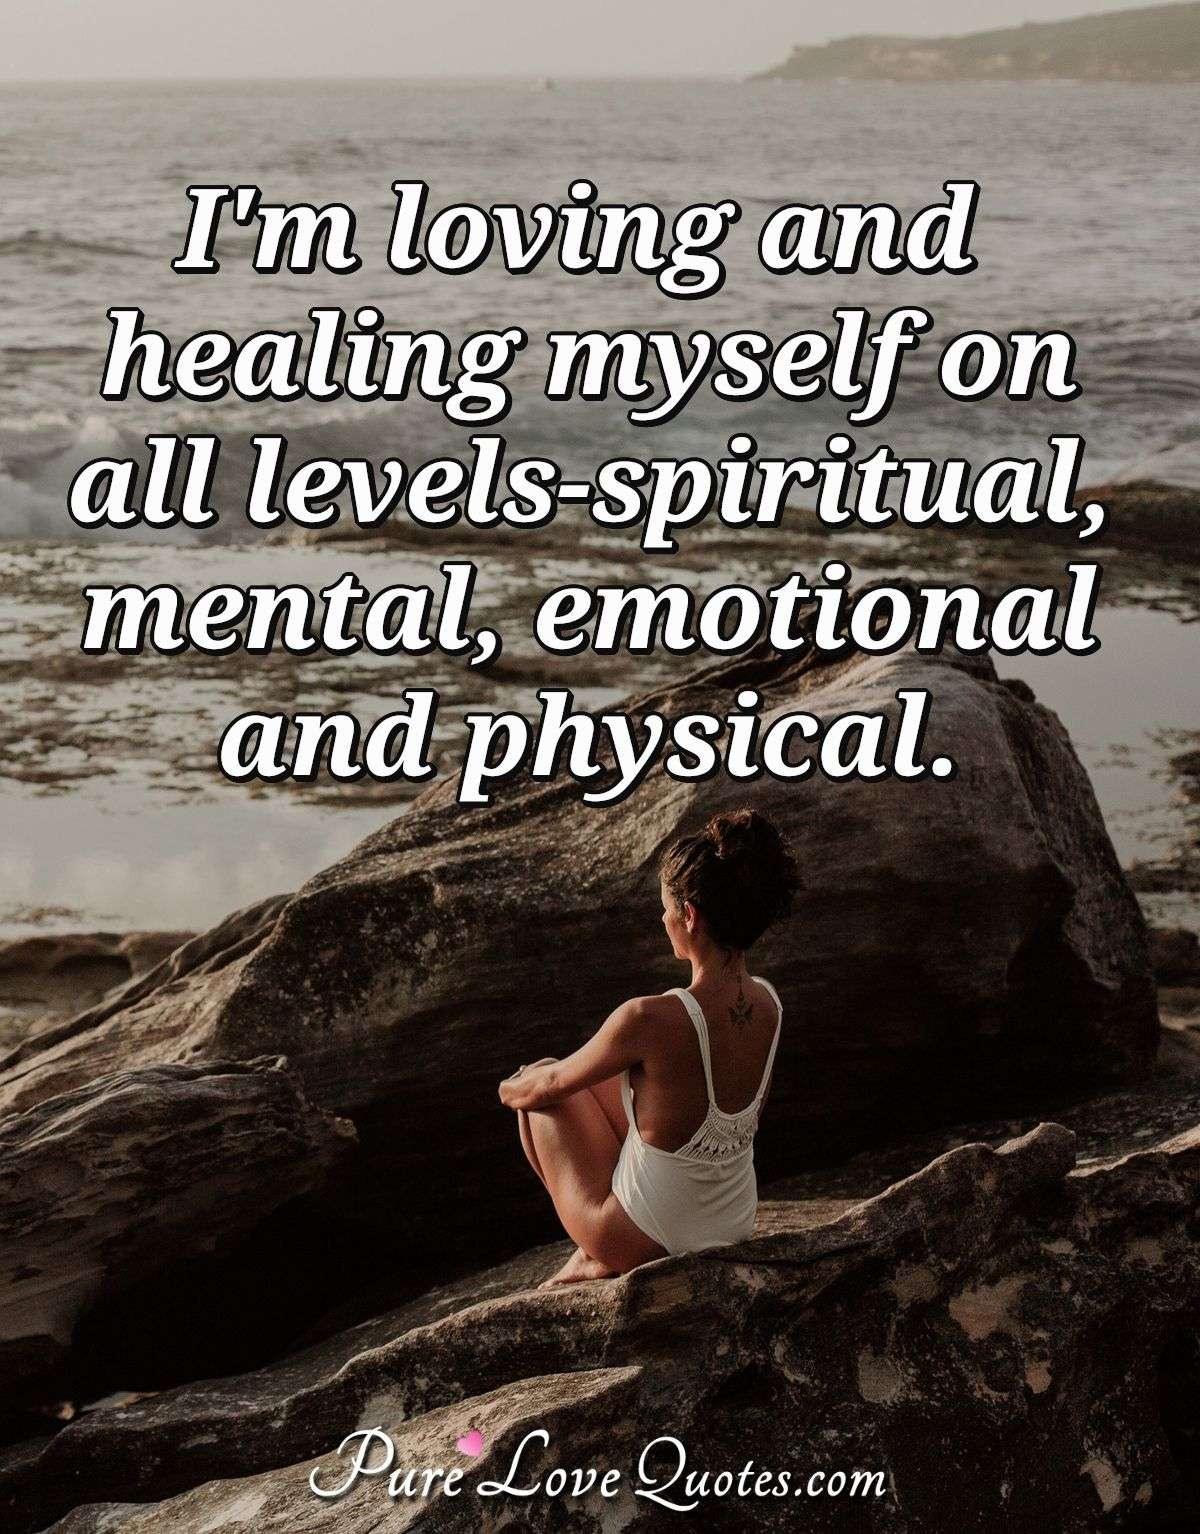 I'm loving and healing myself on all levels-spiritual, mental, emotional and physical. - Anonymous